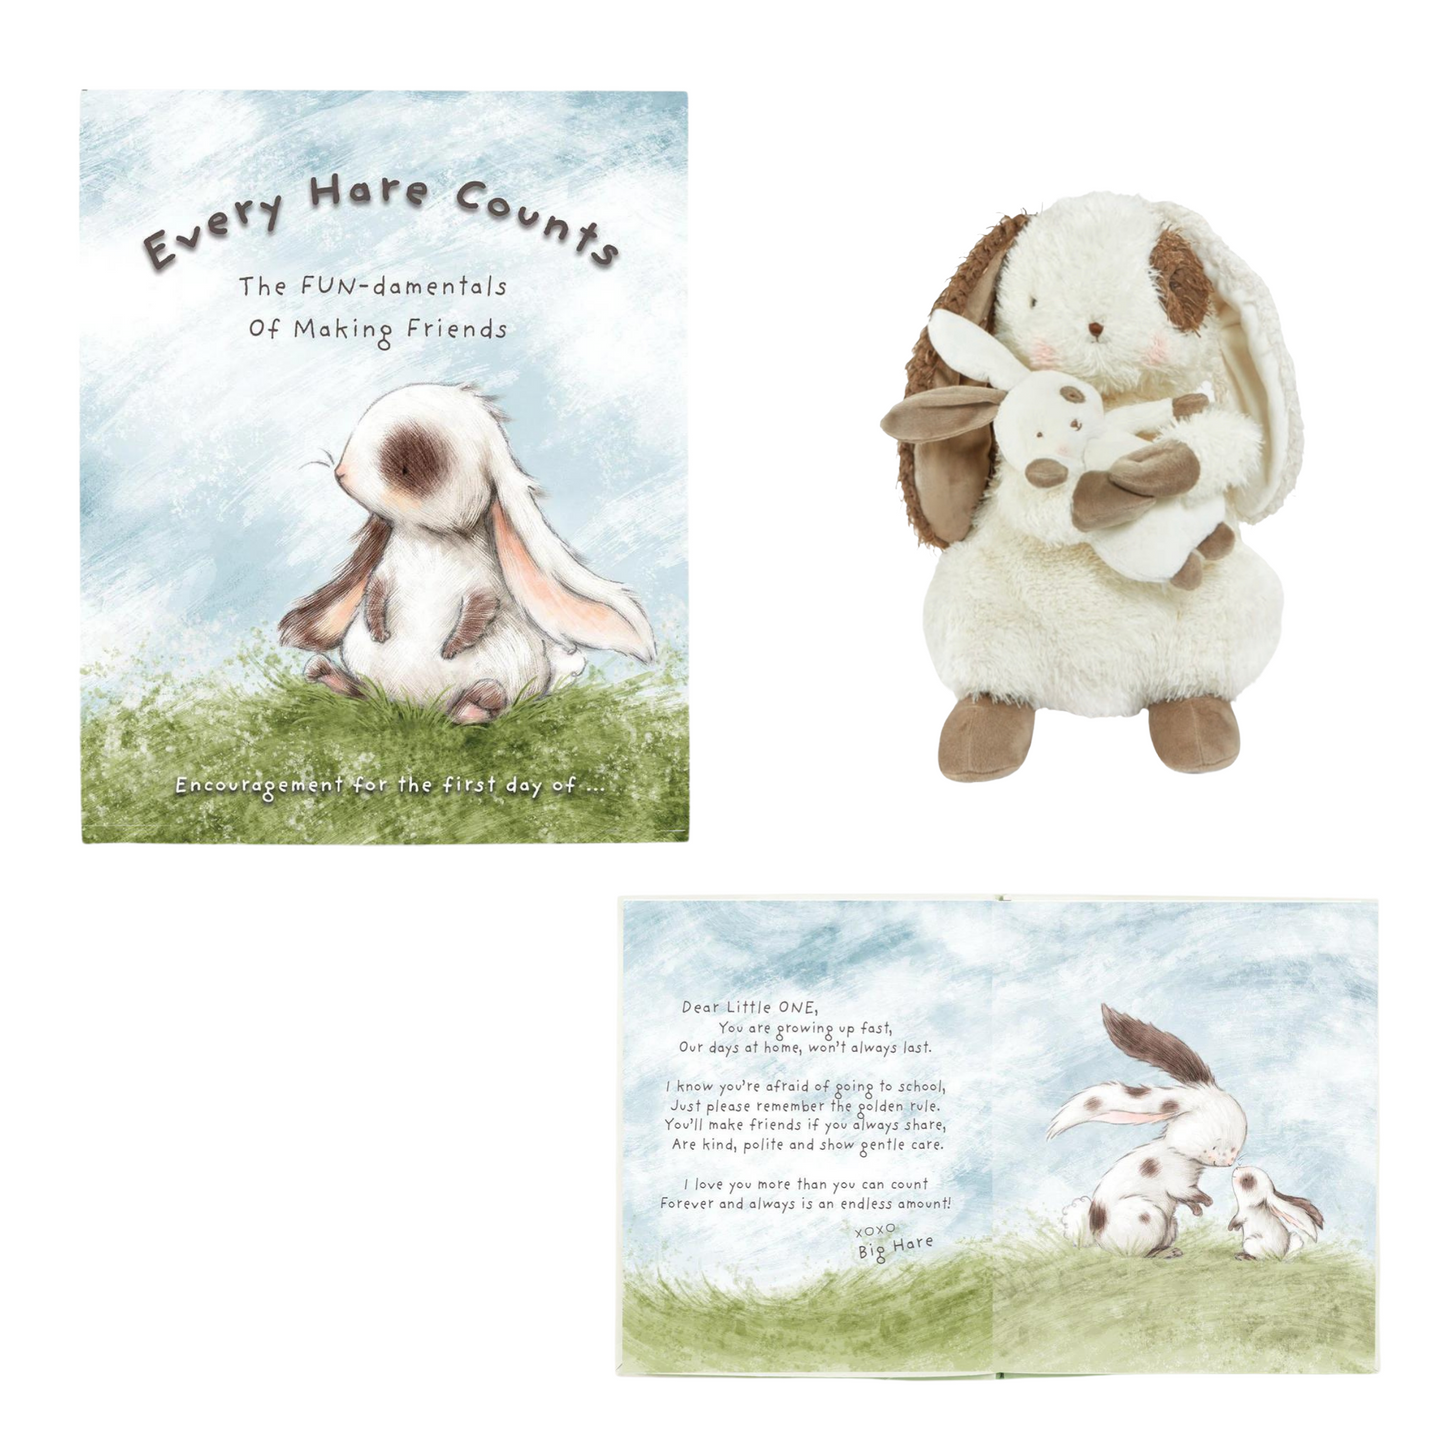 Every Hare Counts Book